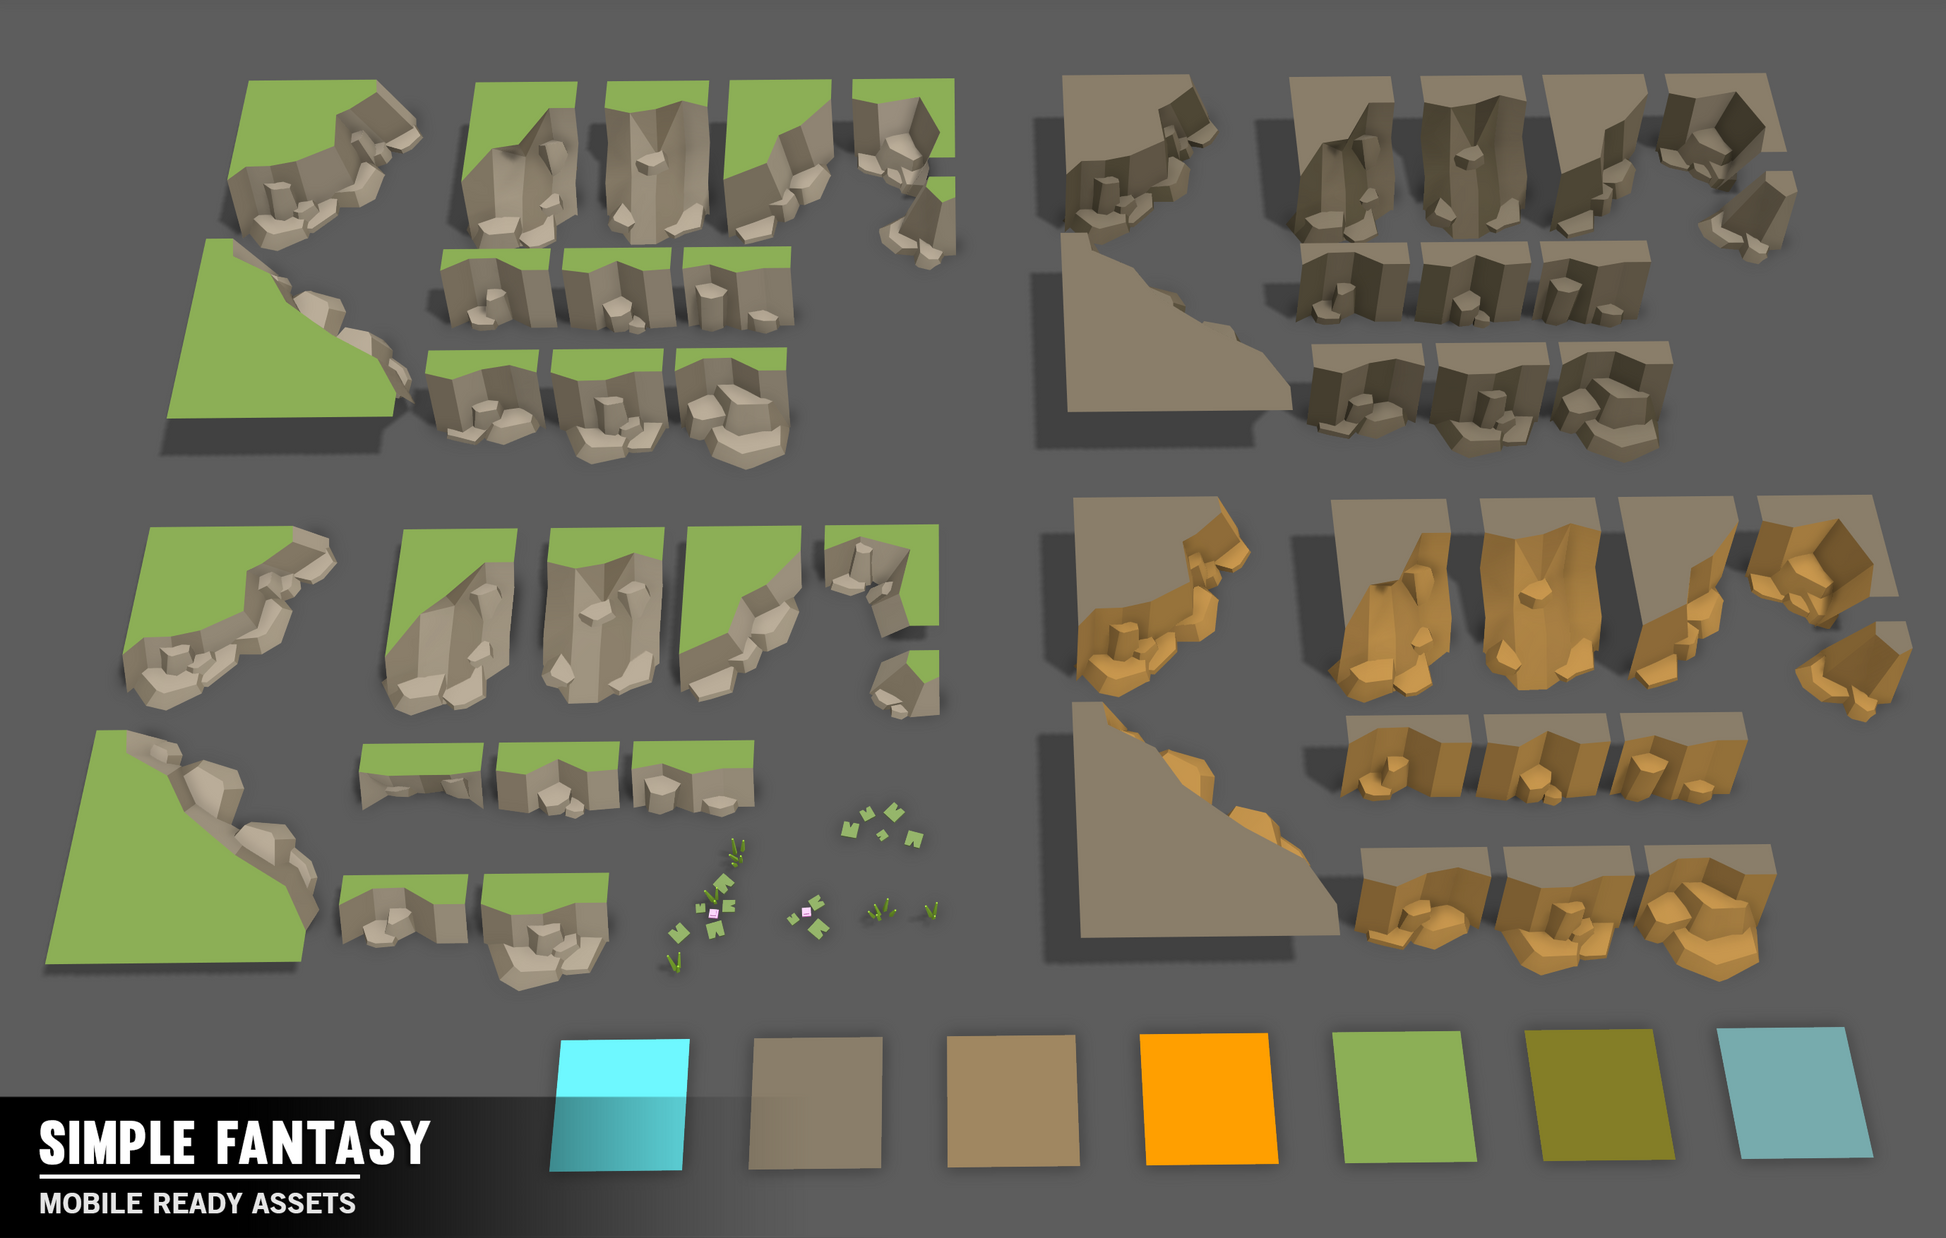 Simple Fantasy low poly texture and nature environment assets for game developers